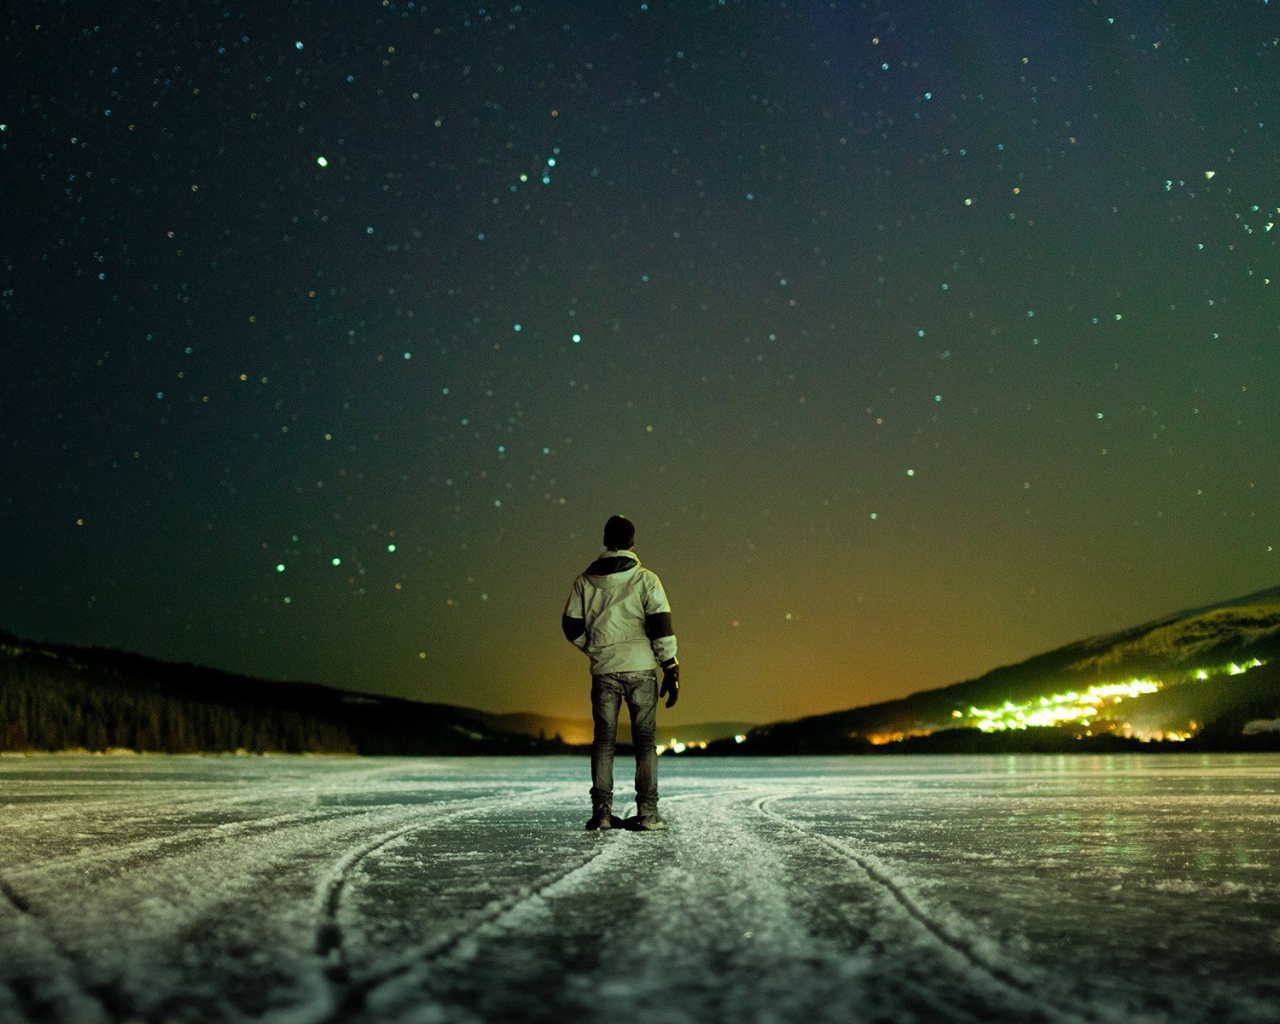 The man on the ice looking up at the stars